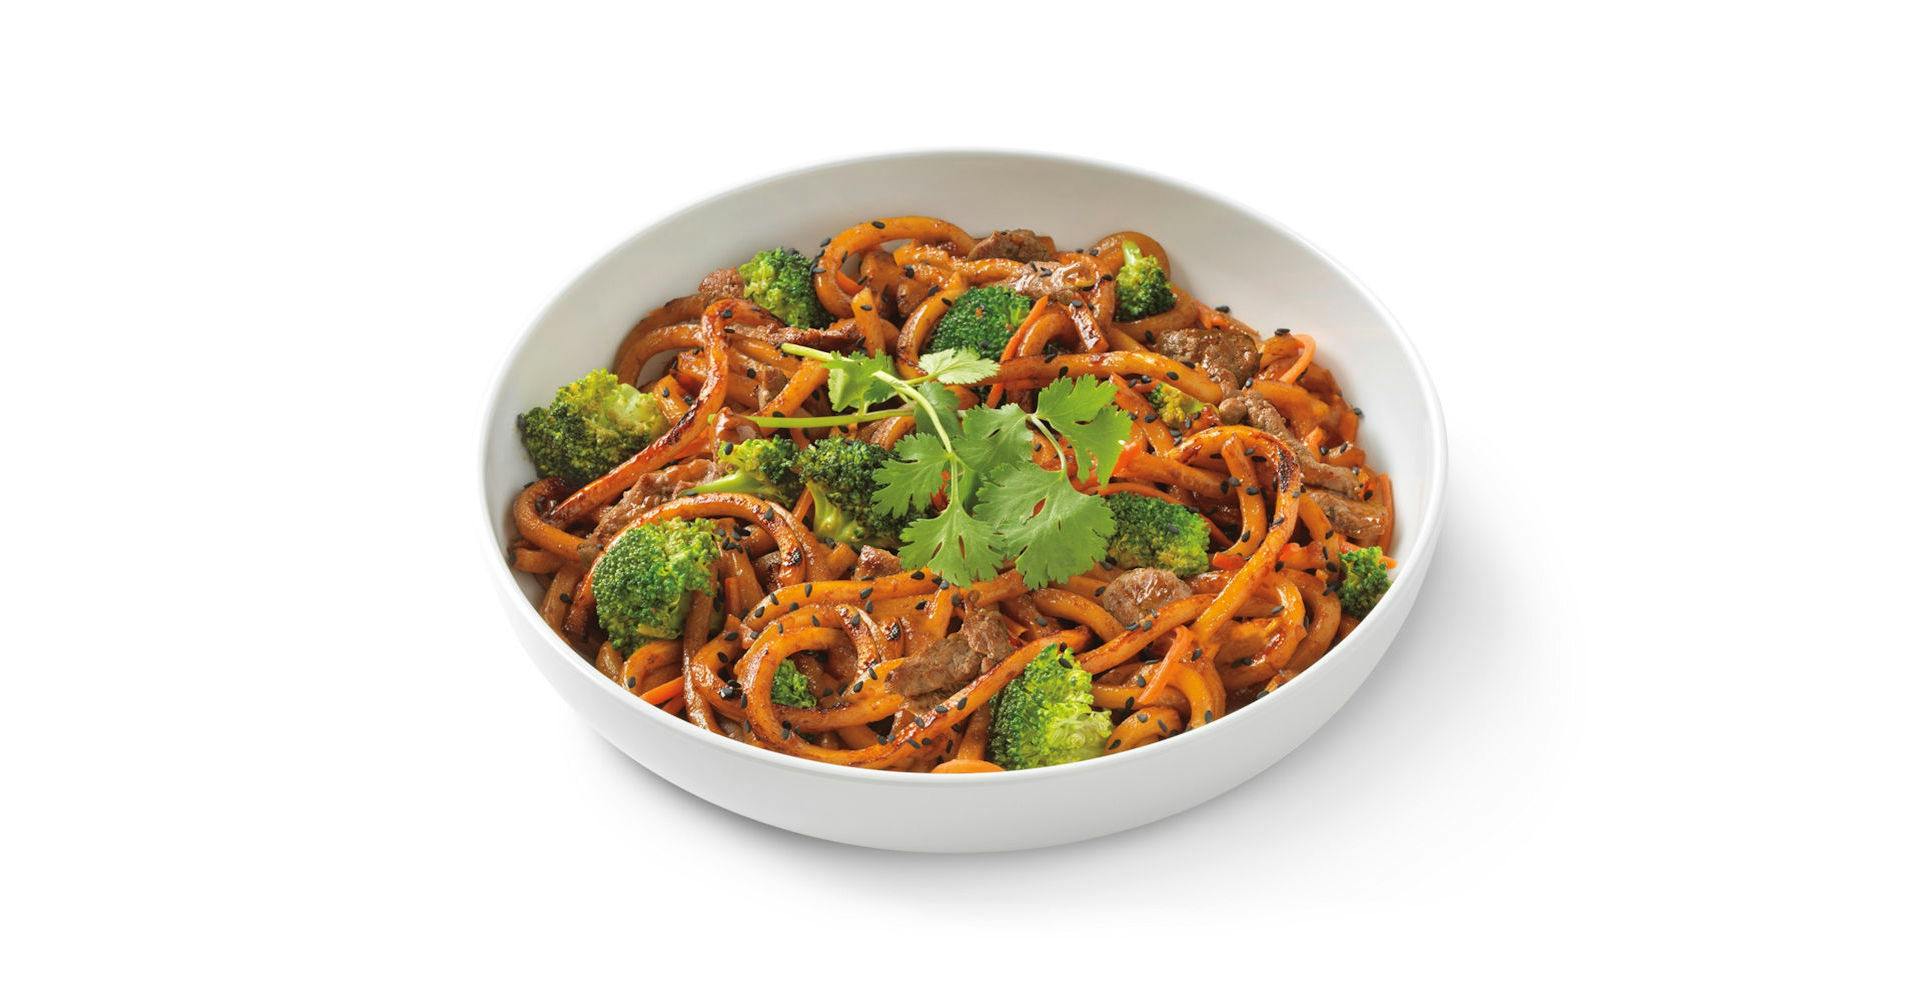 Japanese Pan Noodles with Marinated Steak from Noodles & Company - Madison University Ave in Madison, WI